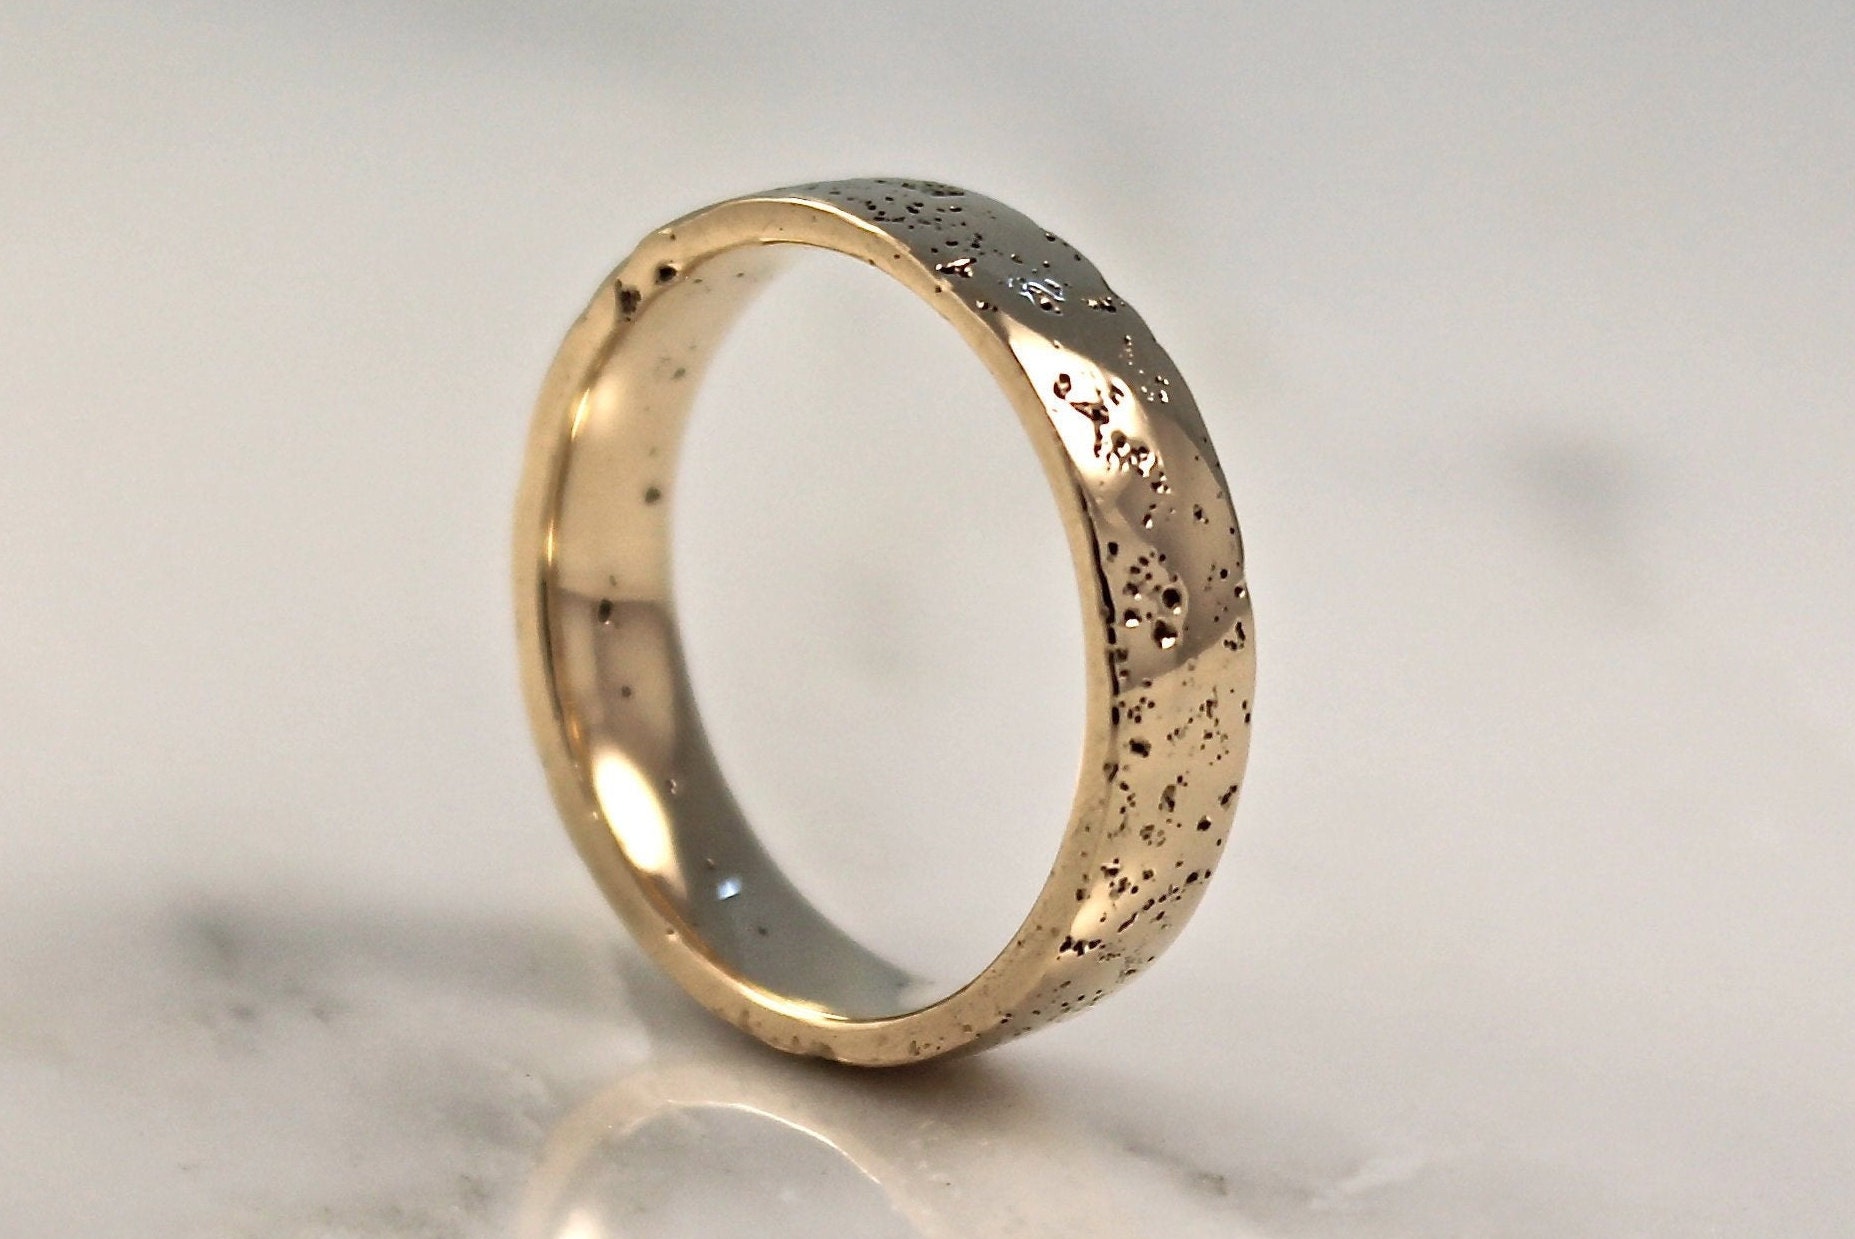 Mens 9Ct Yellow Gold Wedding Ring, Textured Sand Cast Band, Natural Simple Ring By Woodengold